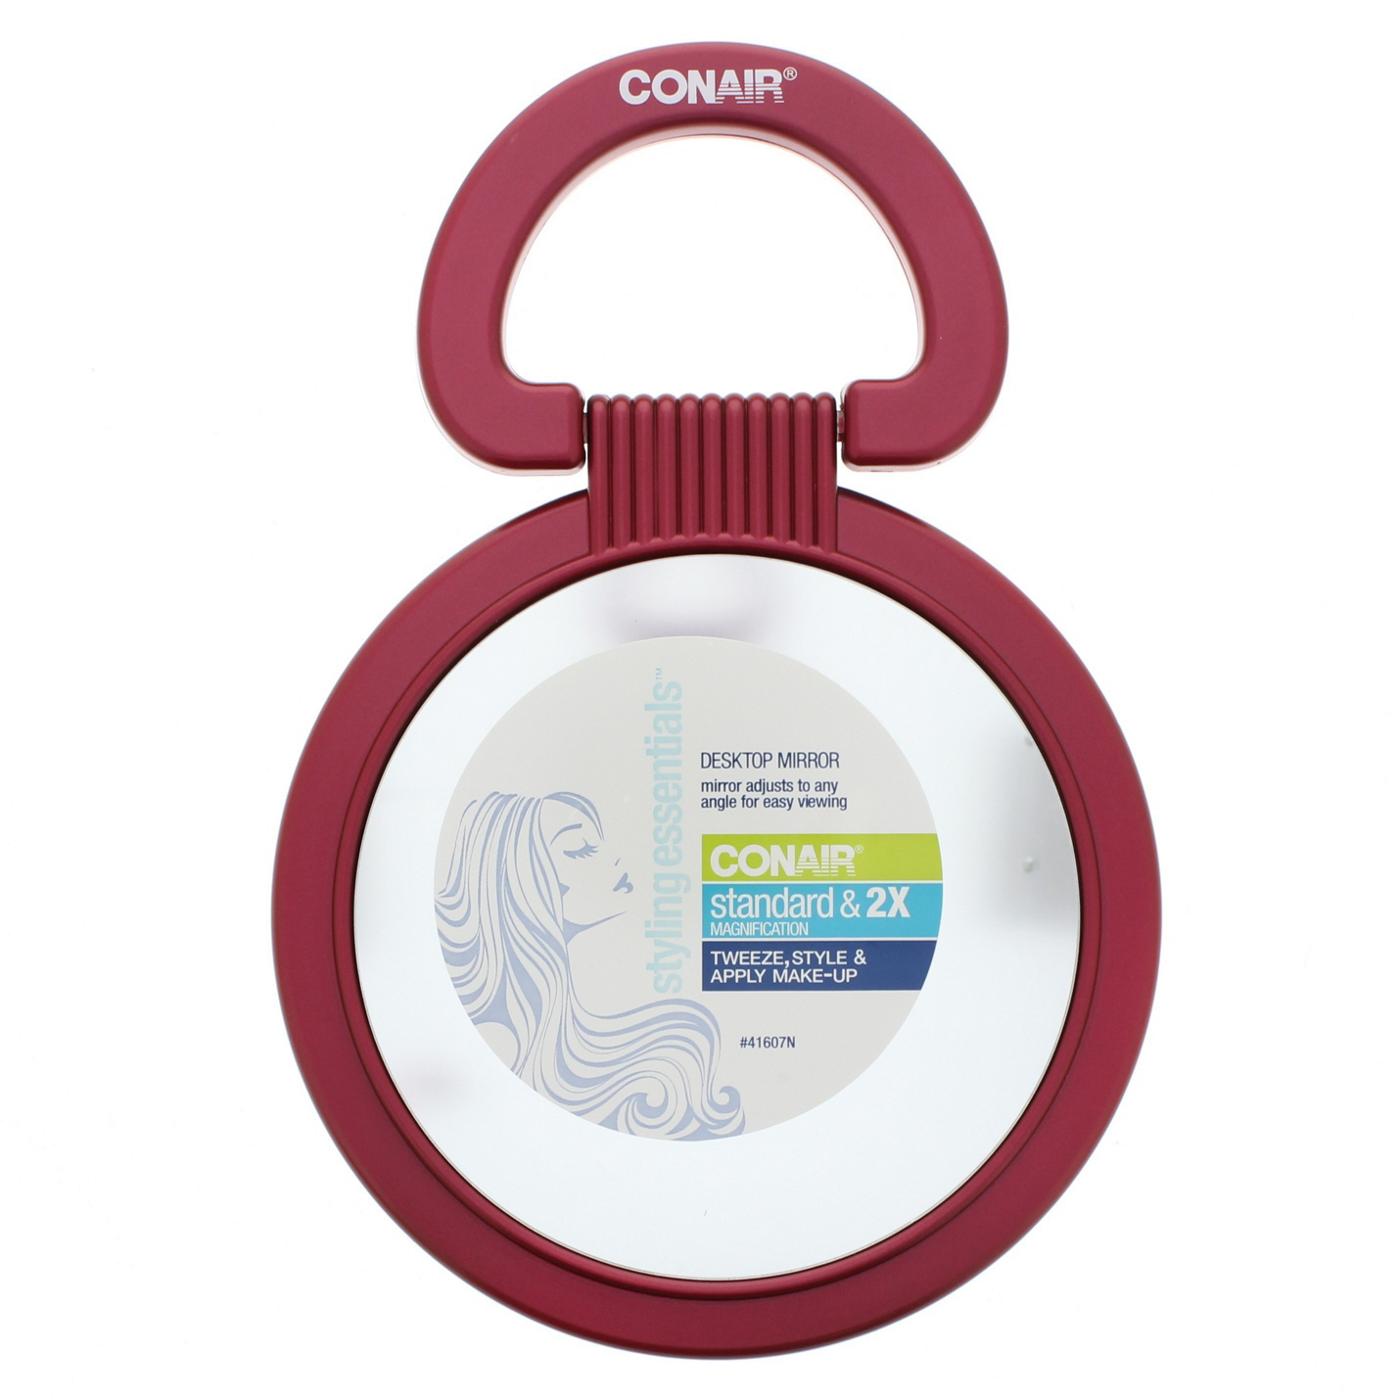 Conair Styling Essentials 3-in-1 Standard Mirror with 2X Magnification, Assorted Colors; image 1 of 3